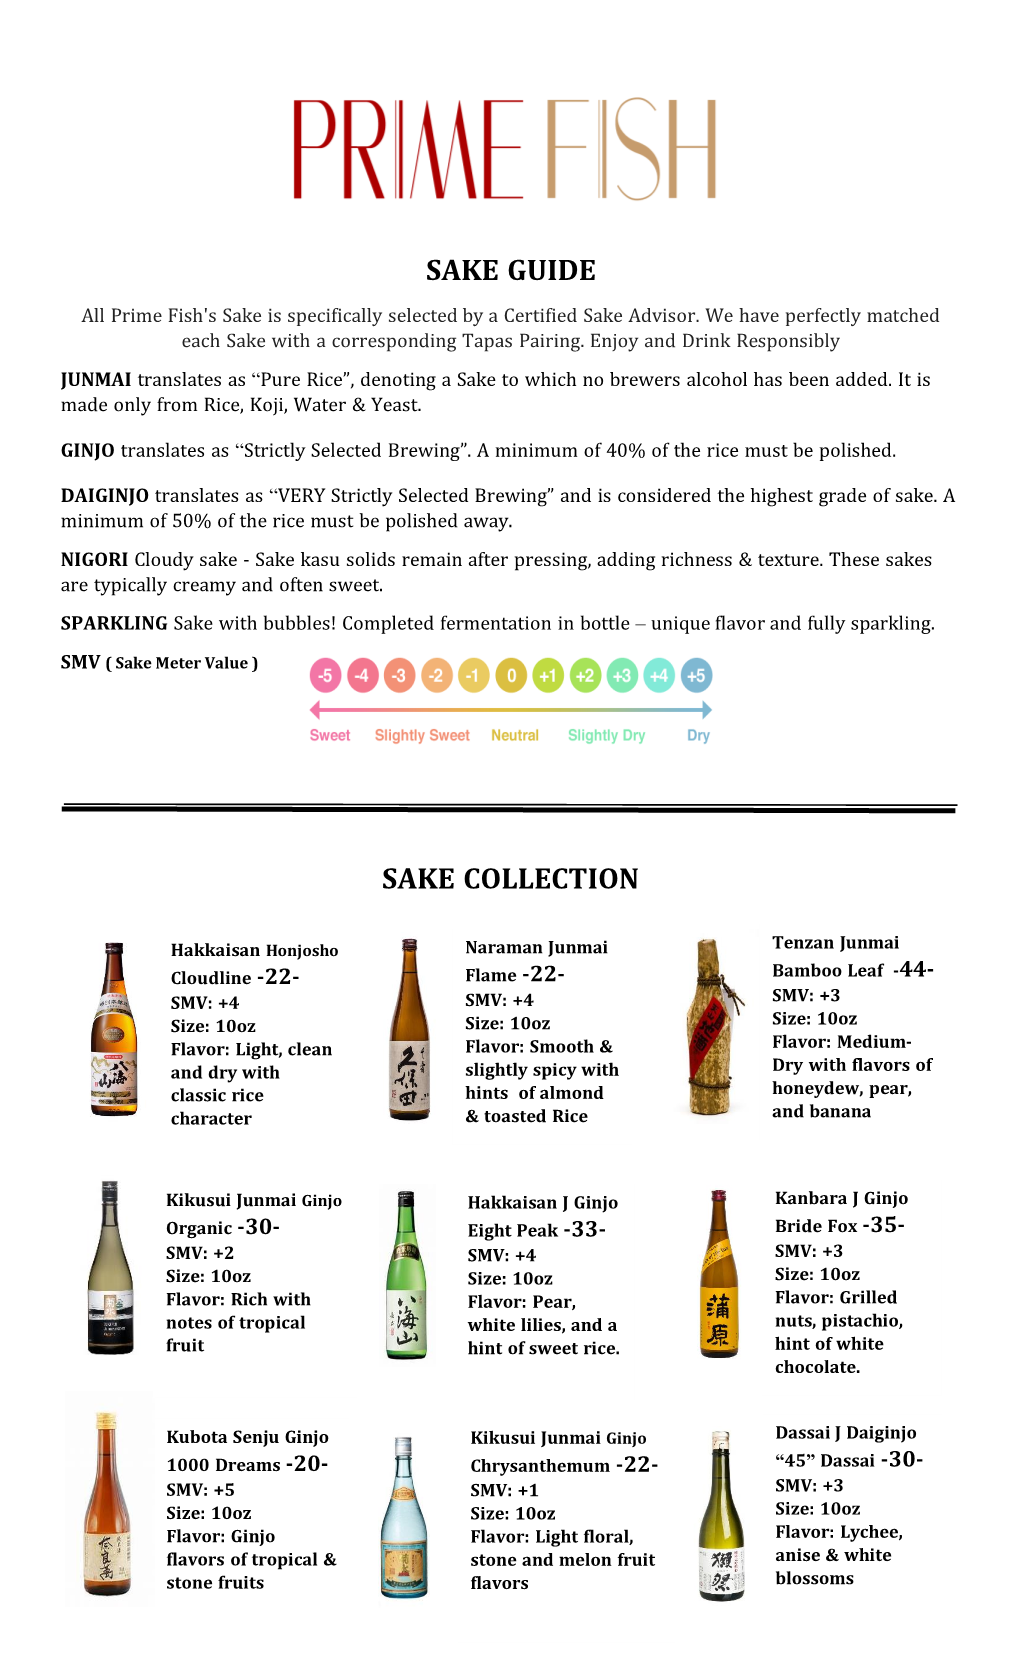 SAKE GUIDE All Prime Fish's Sake Is Specifically Selected by a Certified Sake Advisor